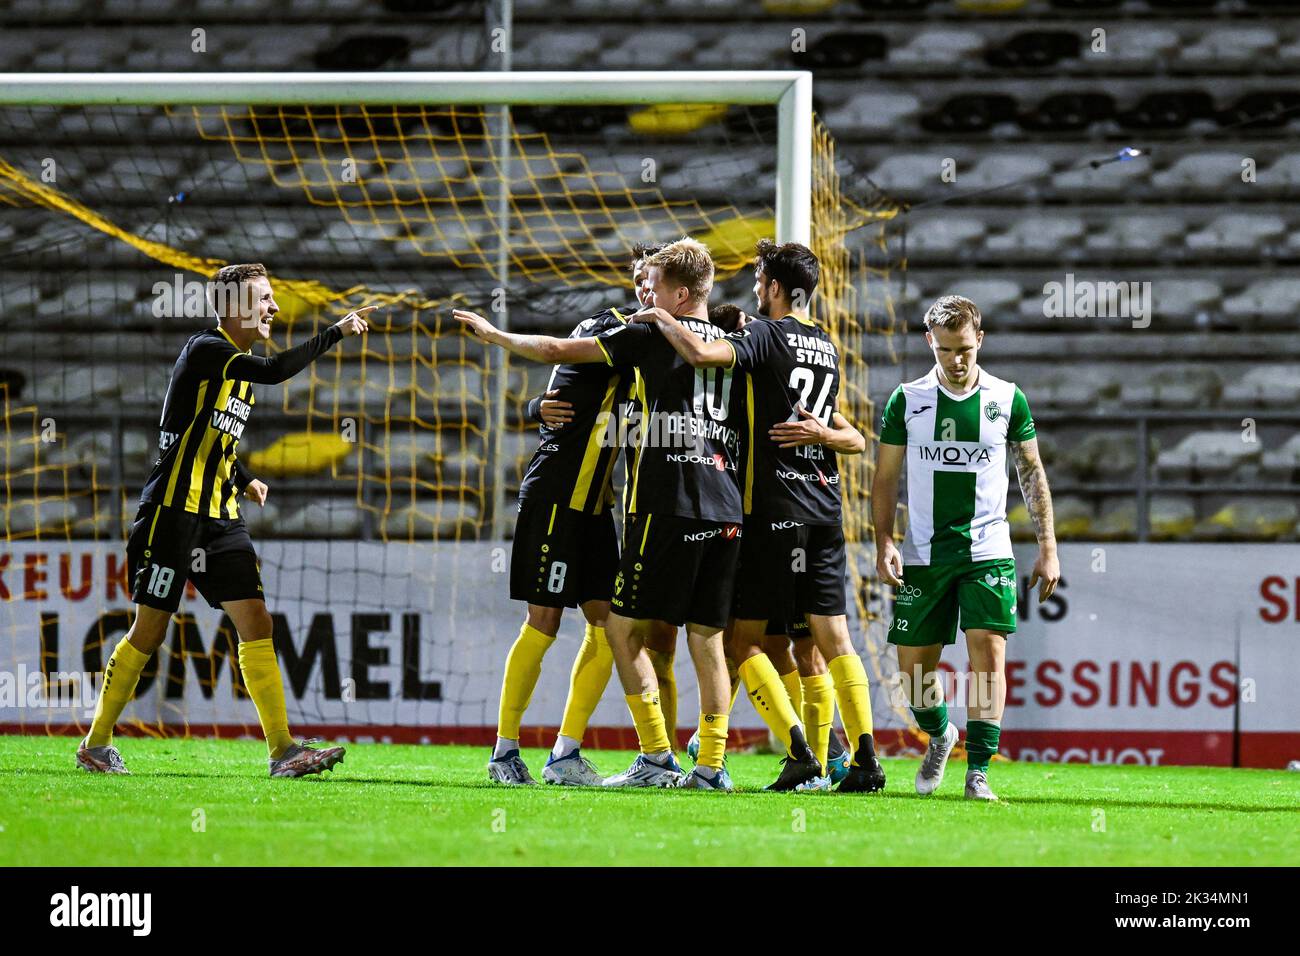 Lierse's Lucas Walbrecq celebrates after scoring during and Racing's Nick Spaenhoven shows defeat during a soccer game between Lierse Kempenzonen and Koninklijke Racing Club Mechelen, Saturday 24 September 2022 in Lier, in the fifth round of the 'Croky Cup' Belgian cup. BELGA PHOTO TOM GOYVAERTS Stock Photo